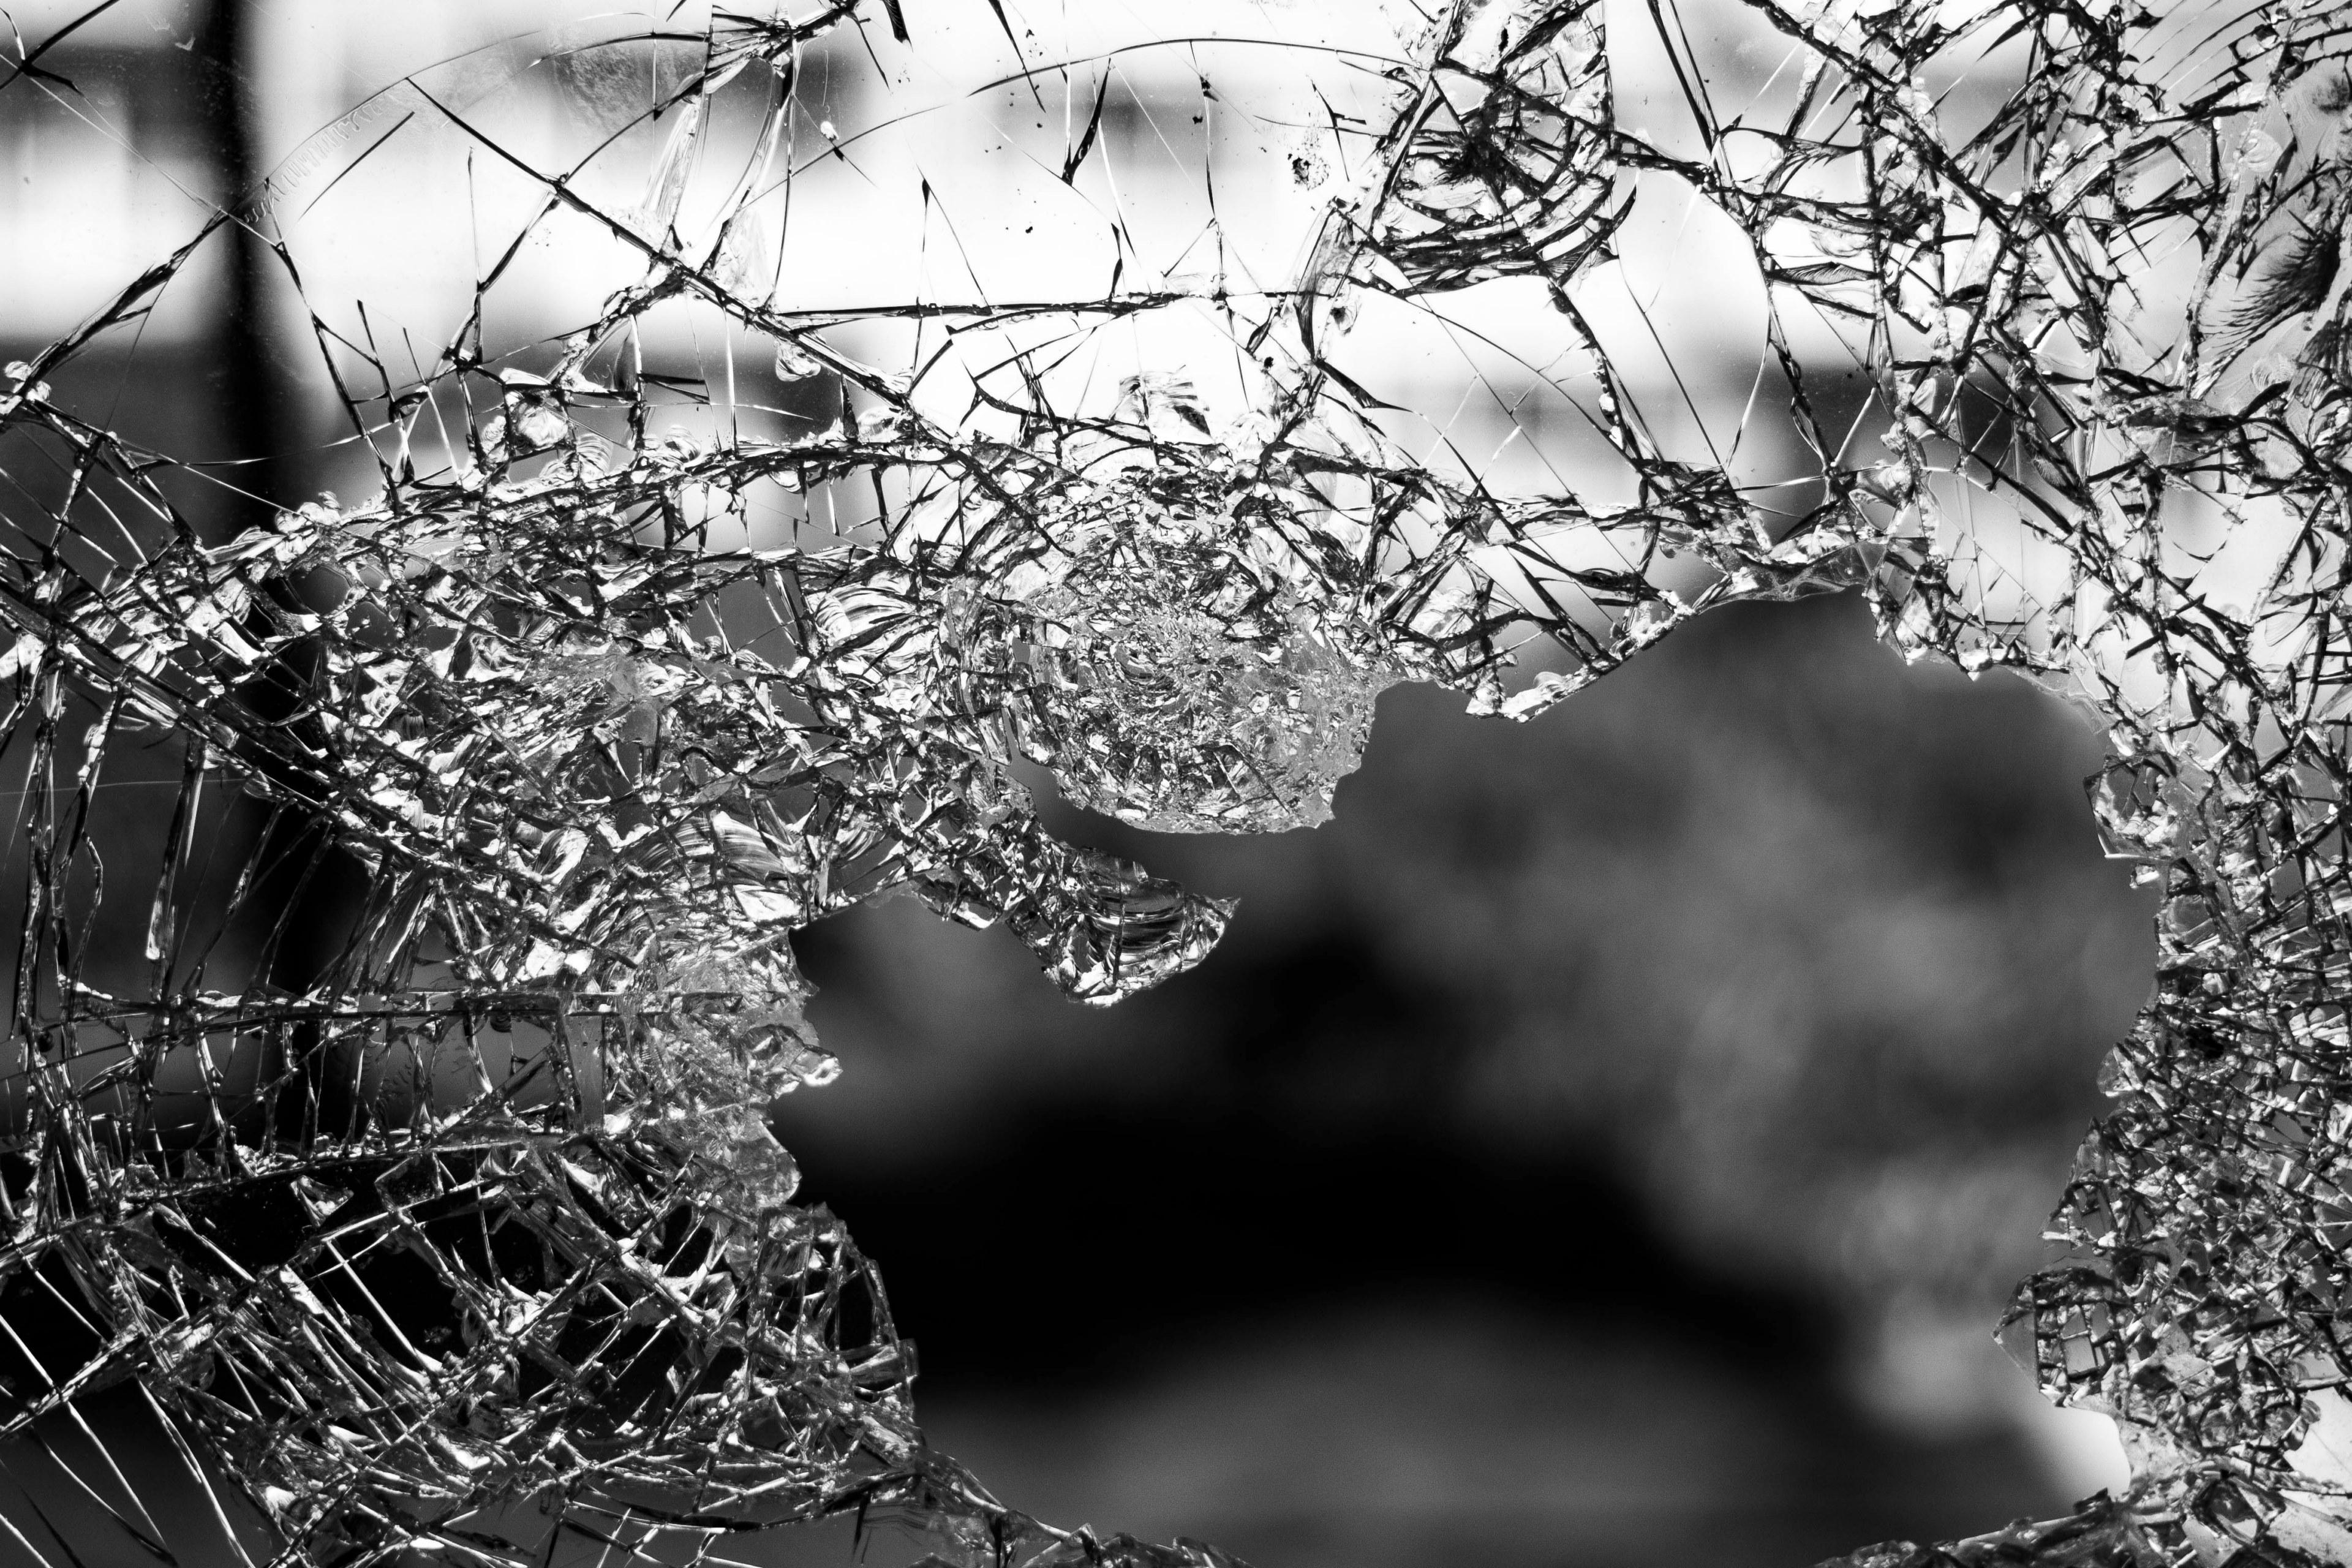 broken glass shatter and smashed HD 4k wallpaper and background